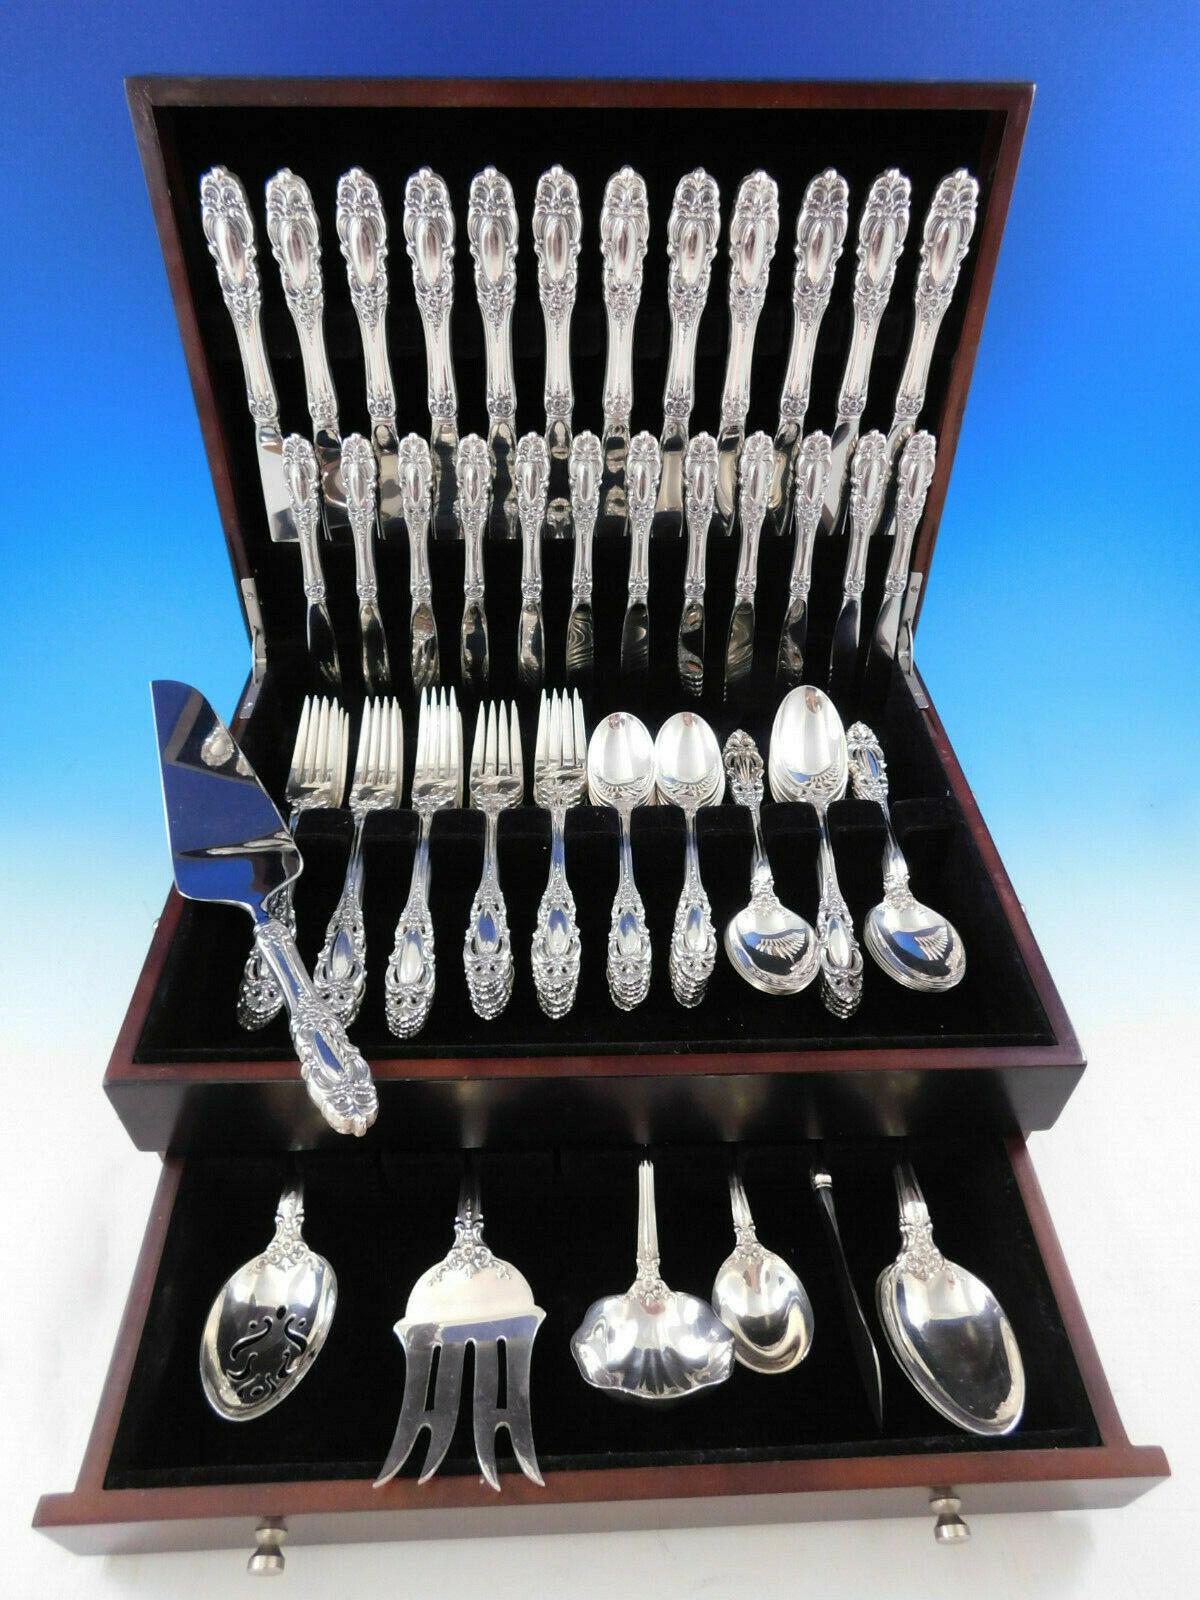 Grand duchess by Towle sterling silver flatware set, 79 pieces. This set includes:

12 knives, 9 1/4